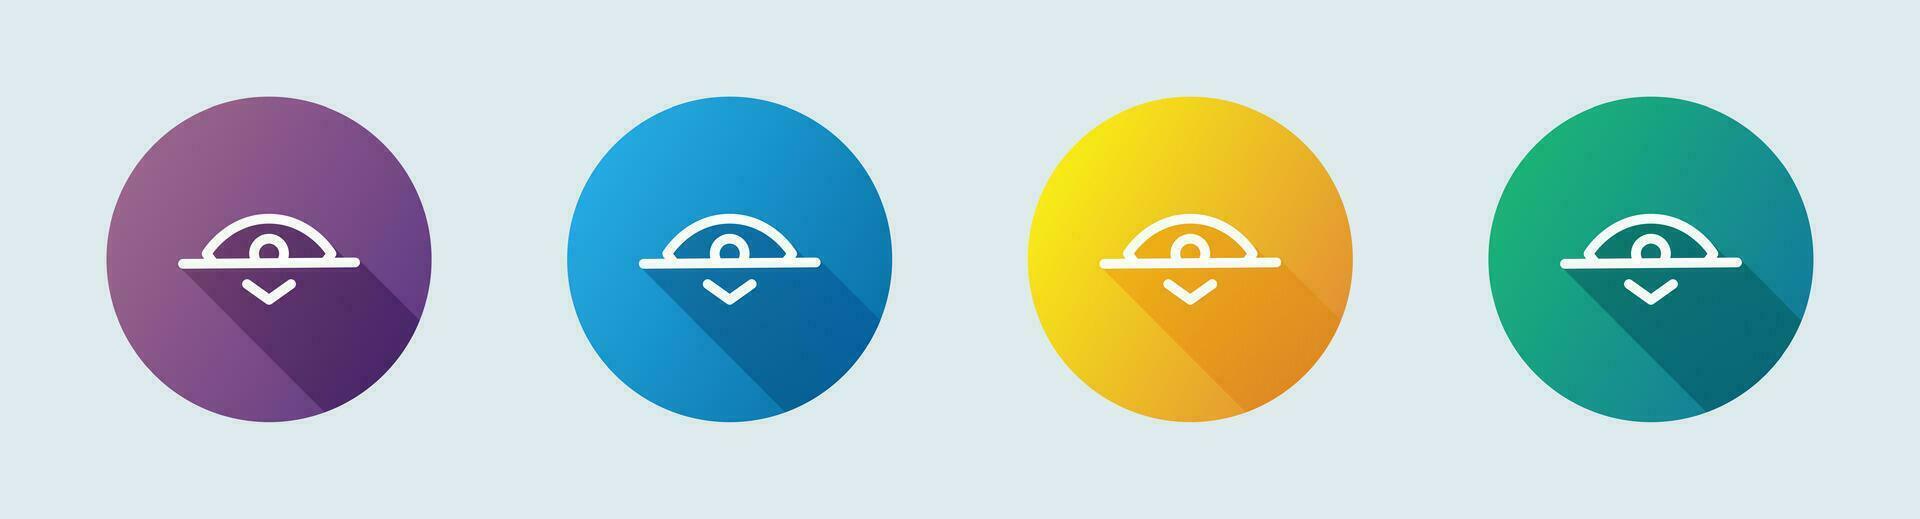 Hide line icon in flat design style. Eye signs vector illustration.